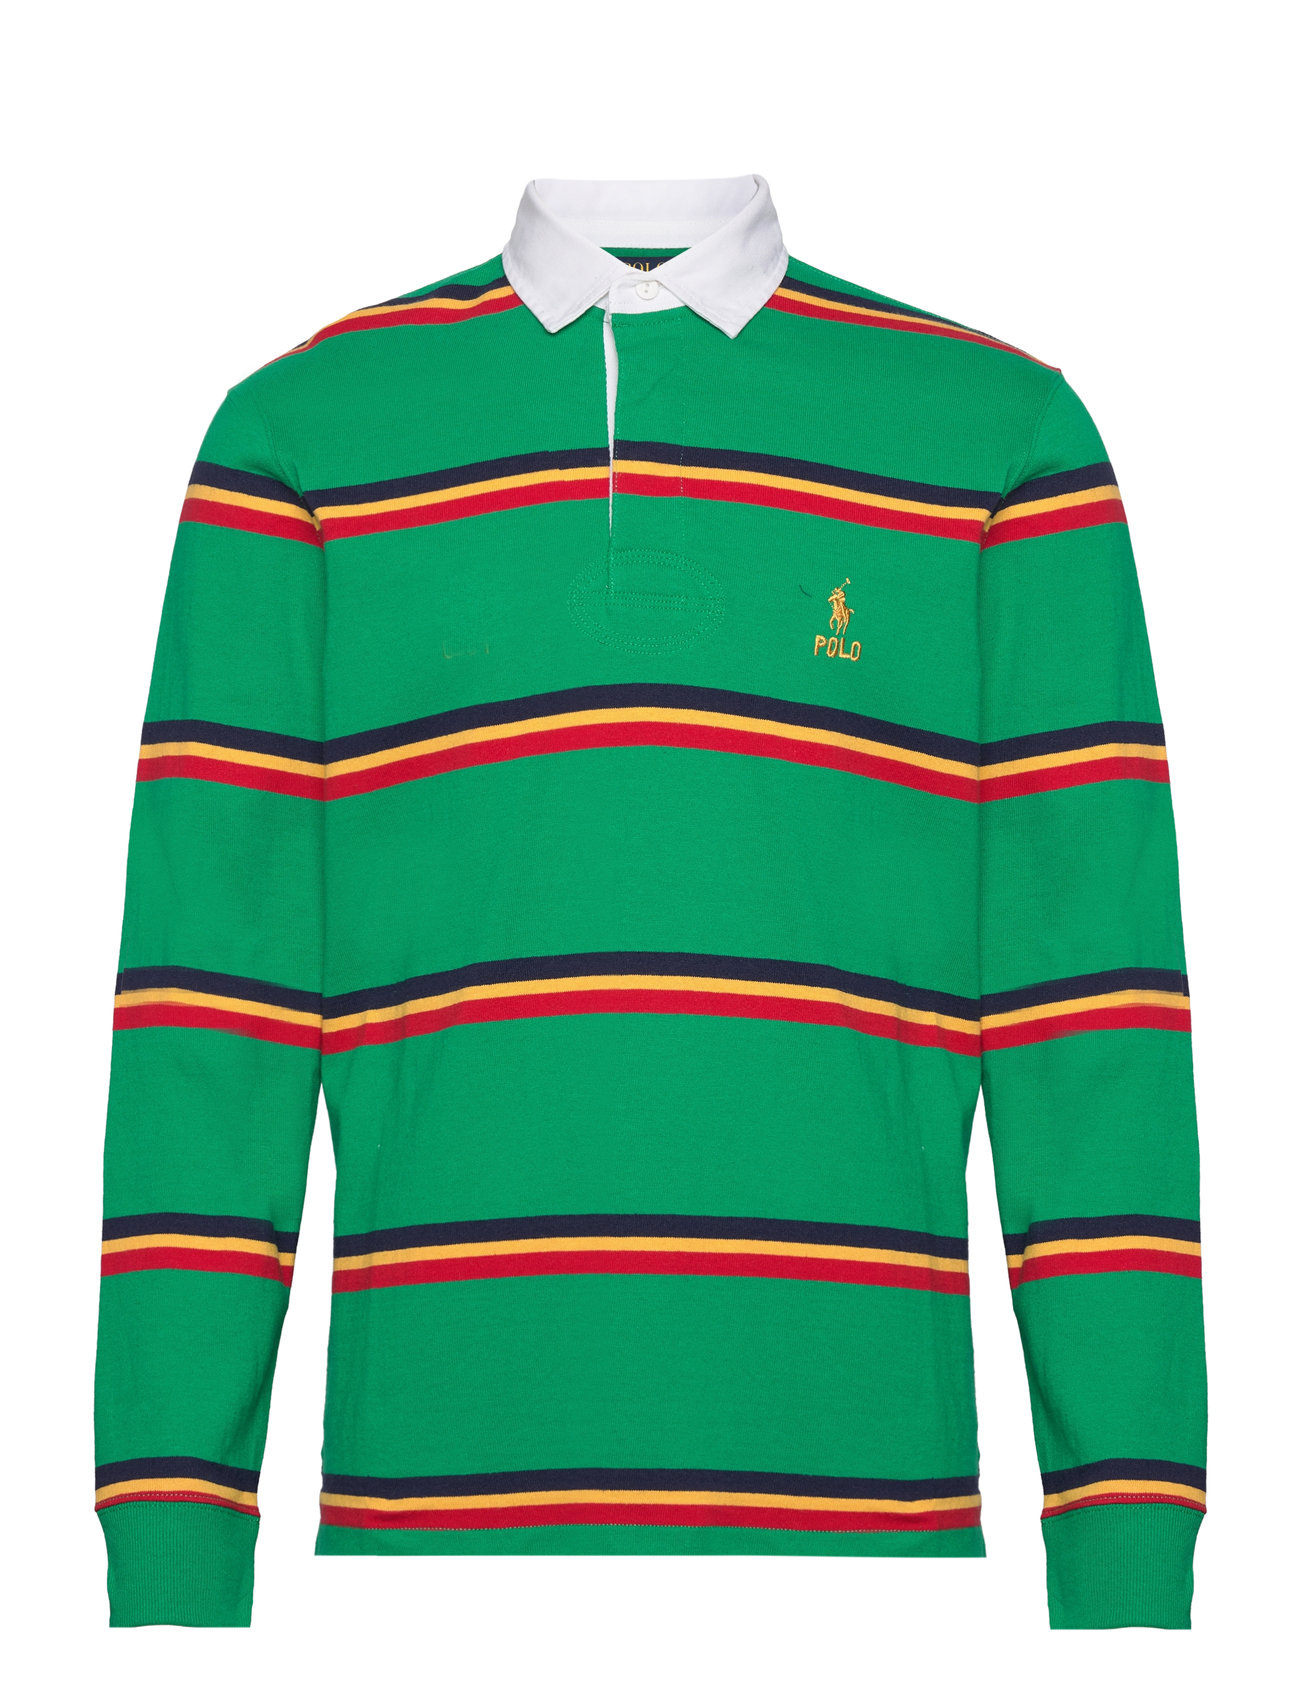 Classic Fit Jersey Rugby Shirt Tops Polos Long-sleeved Green Polo Ralph Lauren